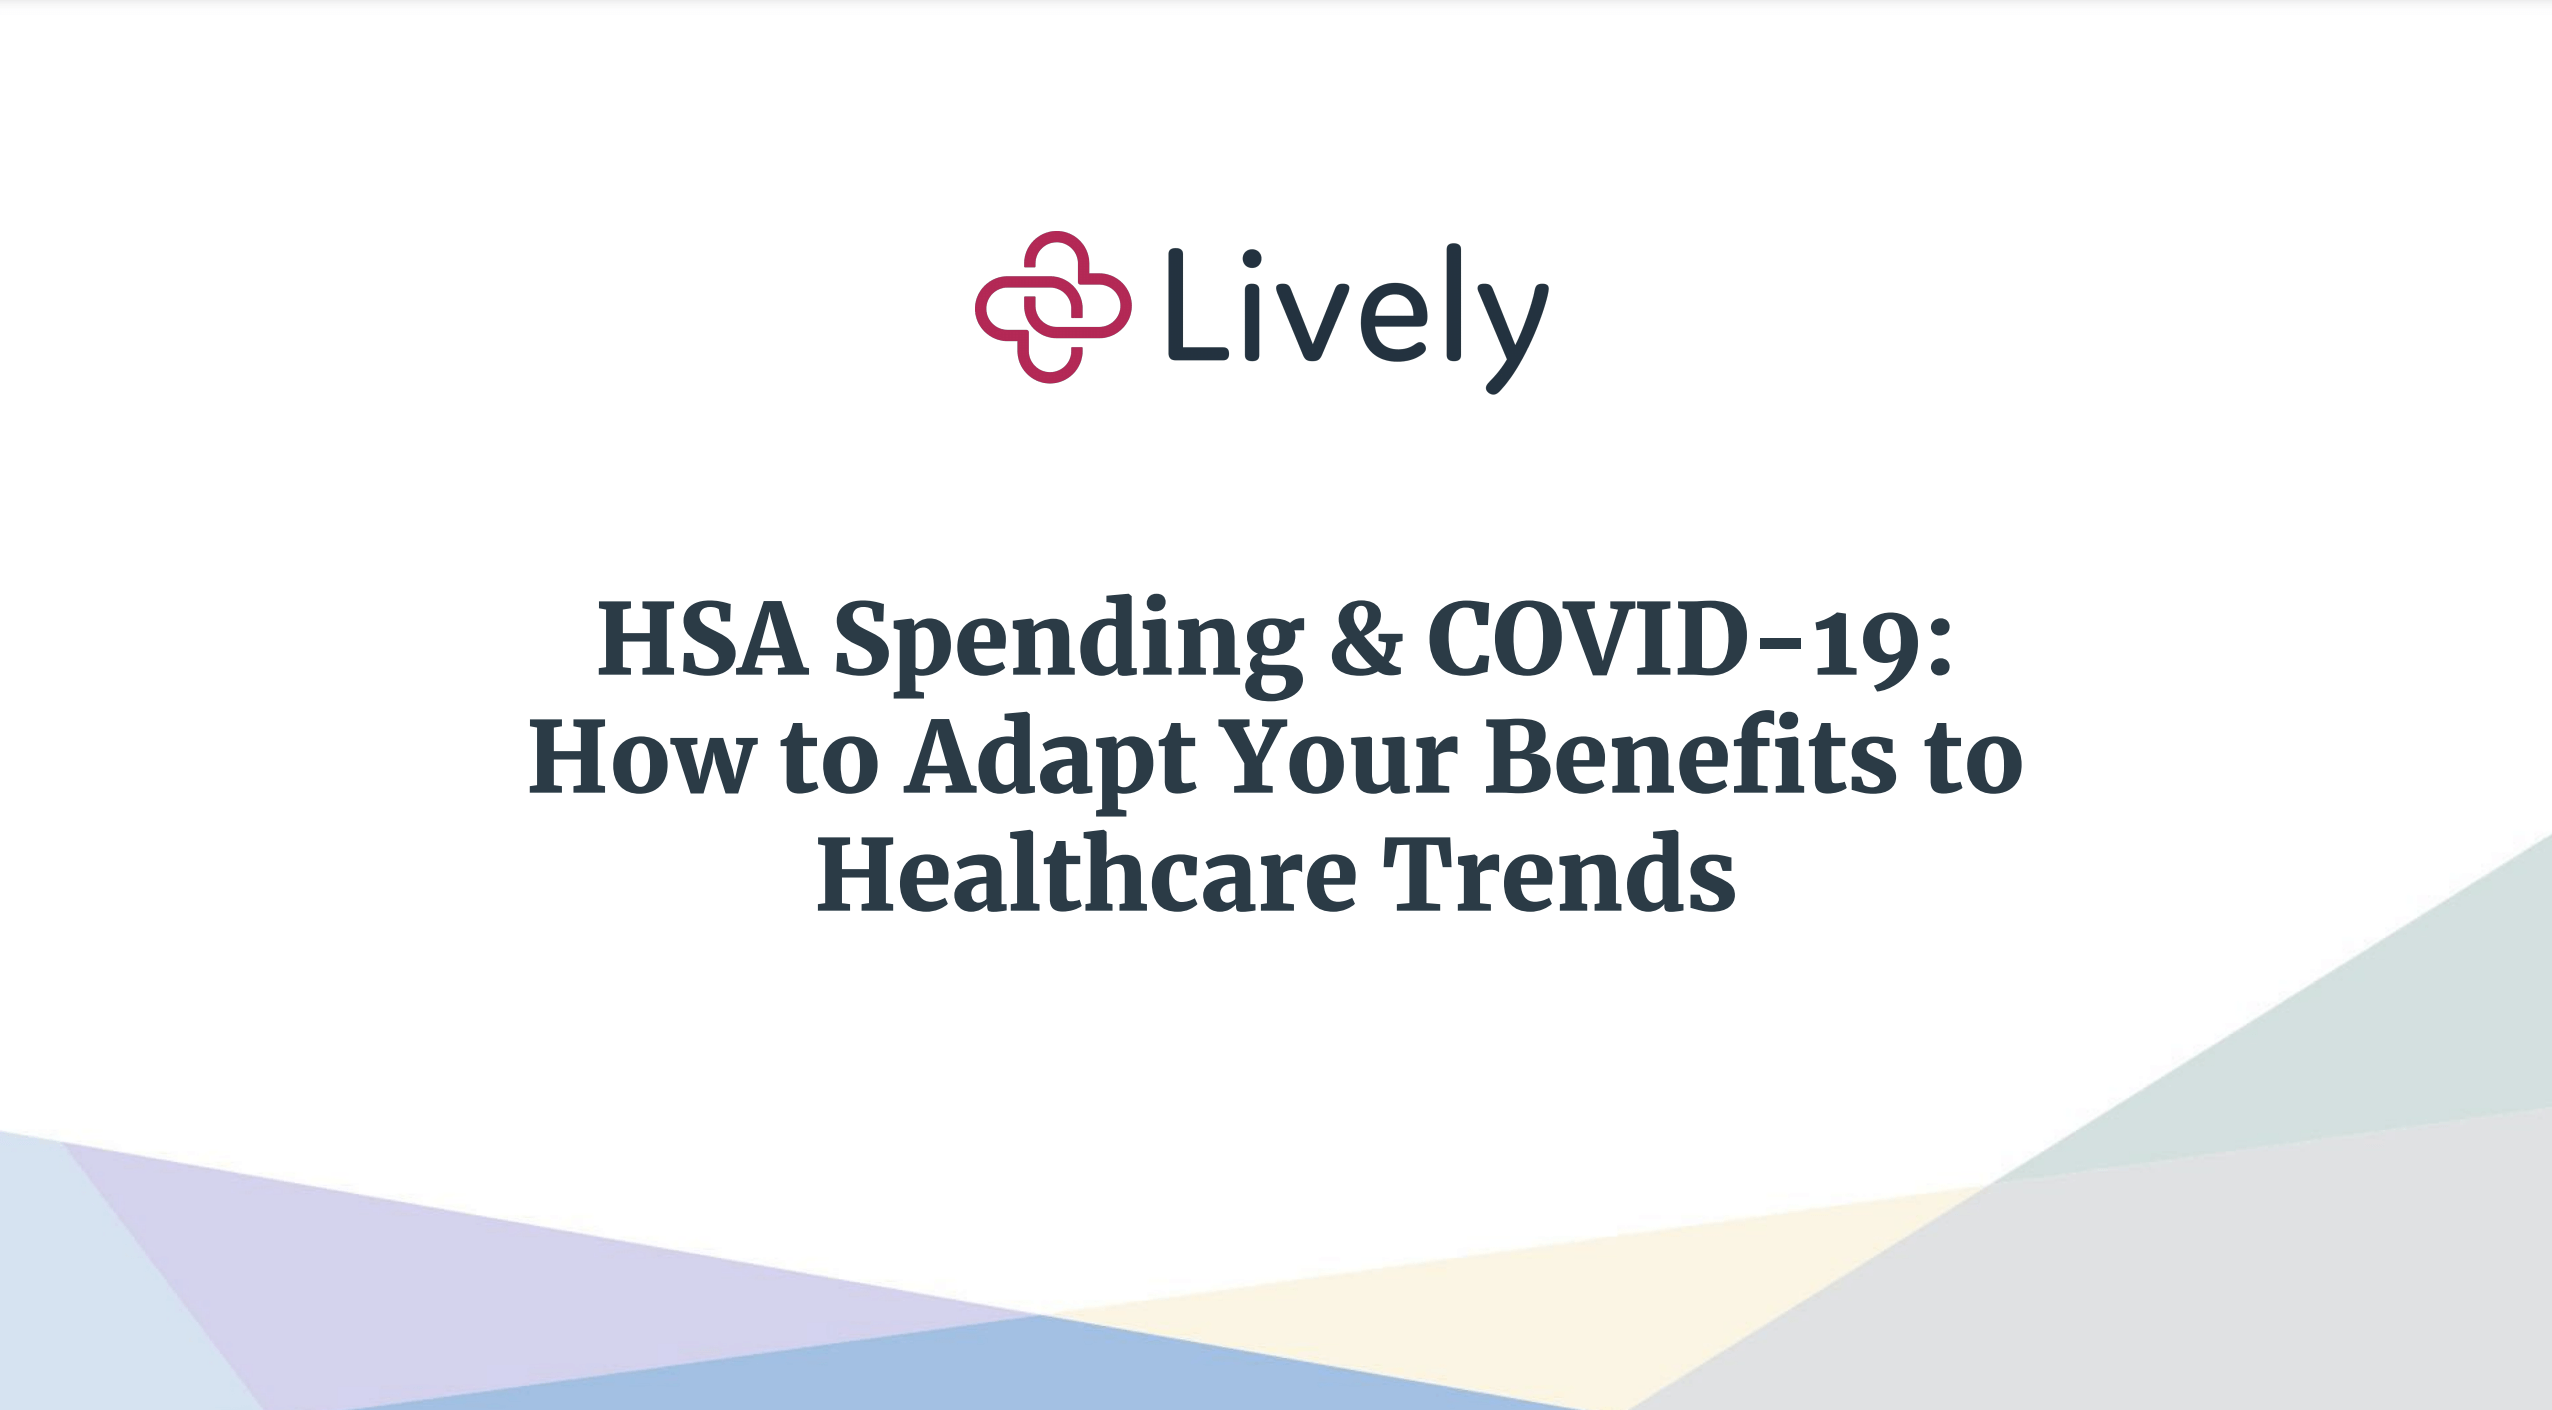 HSA Spending & COVID-19: How to Adapt Benefits to Healthcare Trends